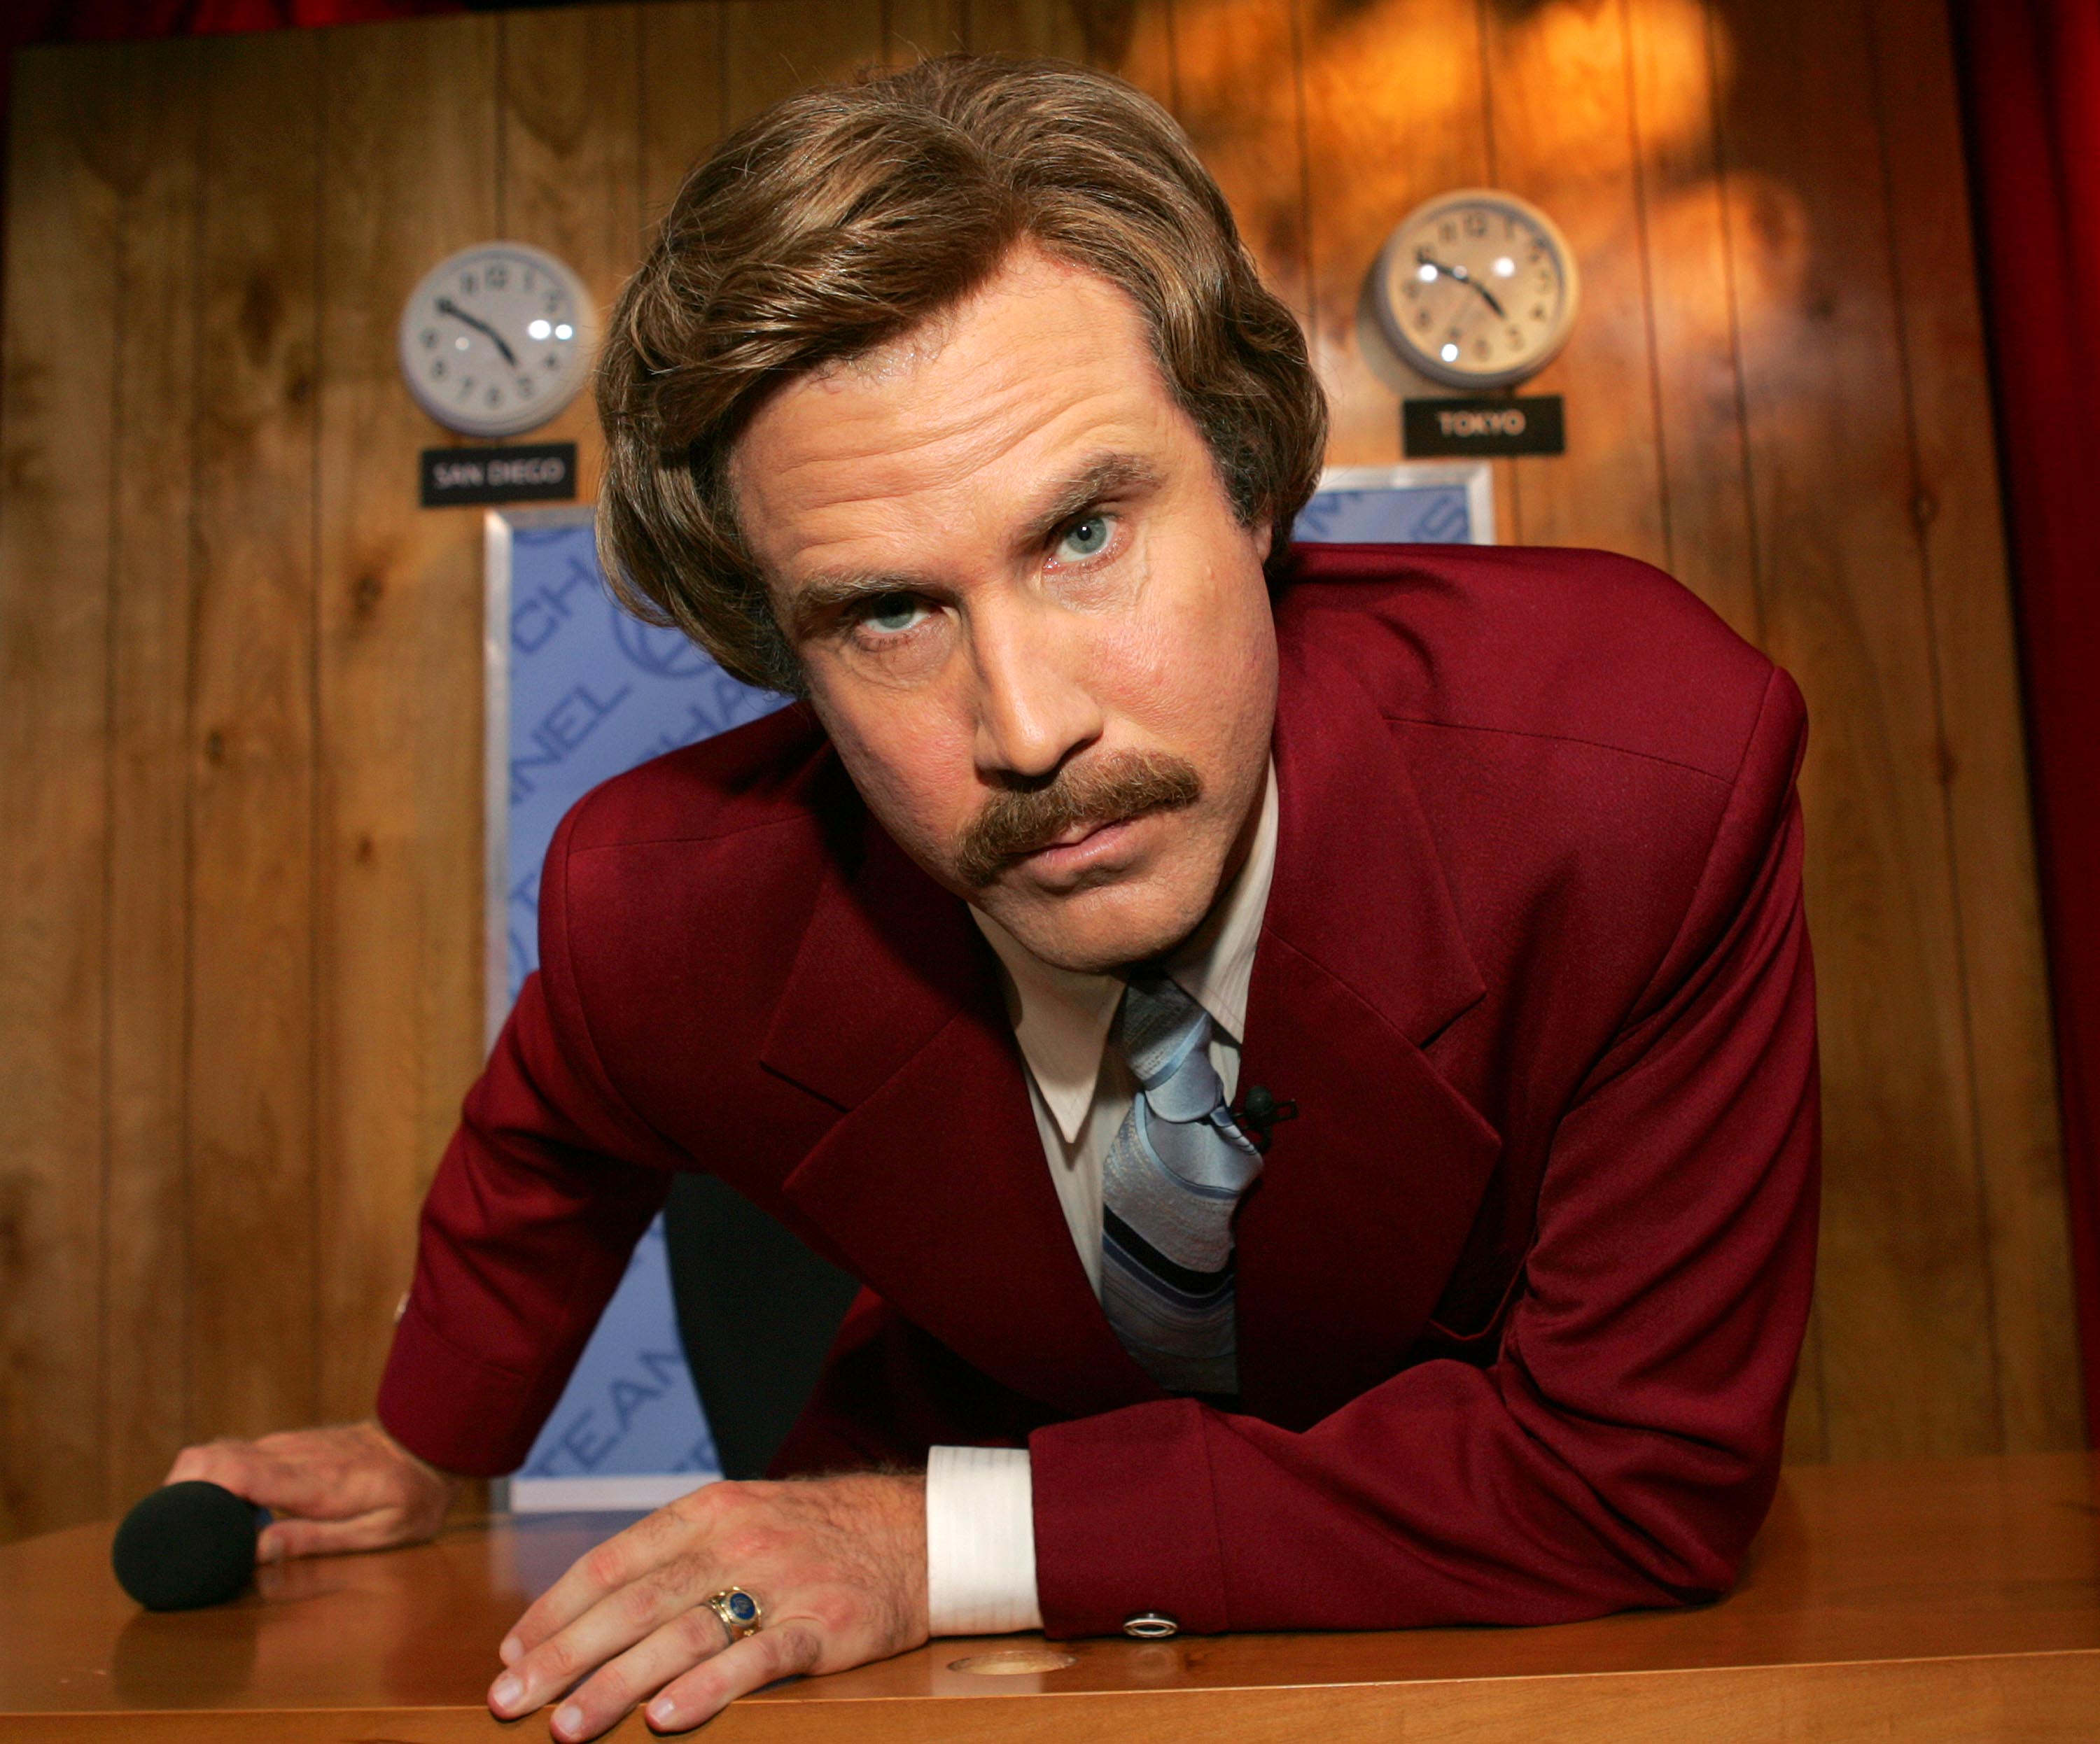 Breaking News President Hires Ron Burgundy To Sell